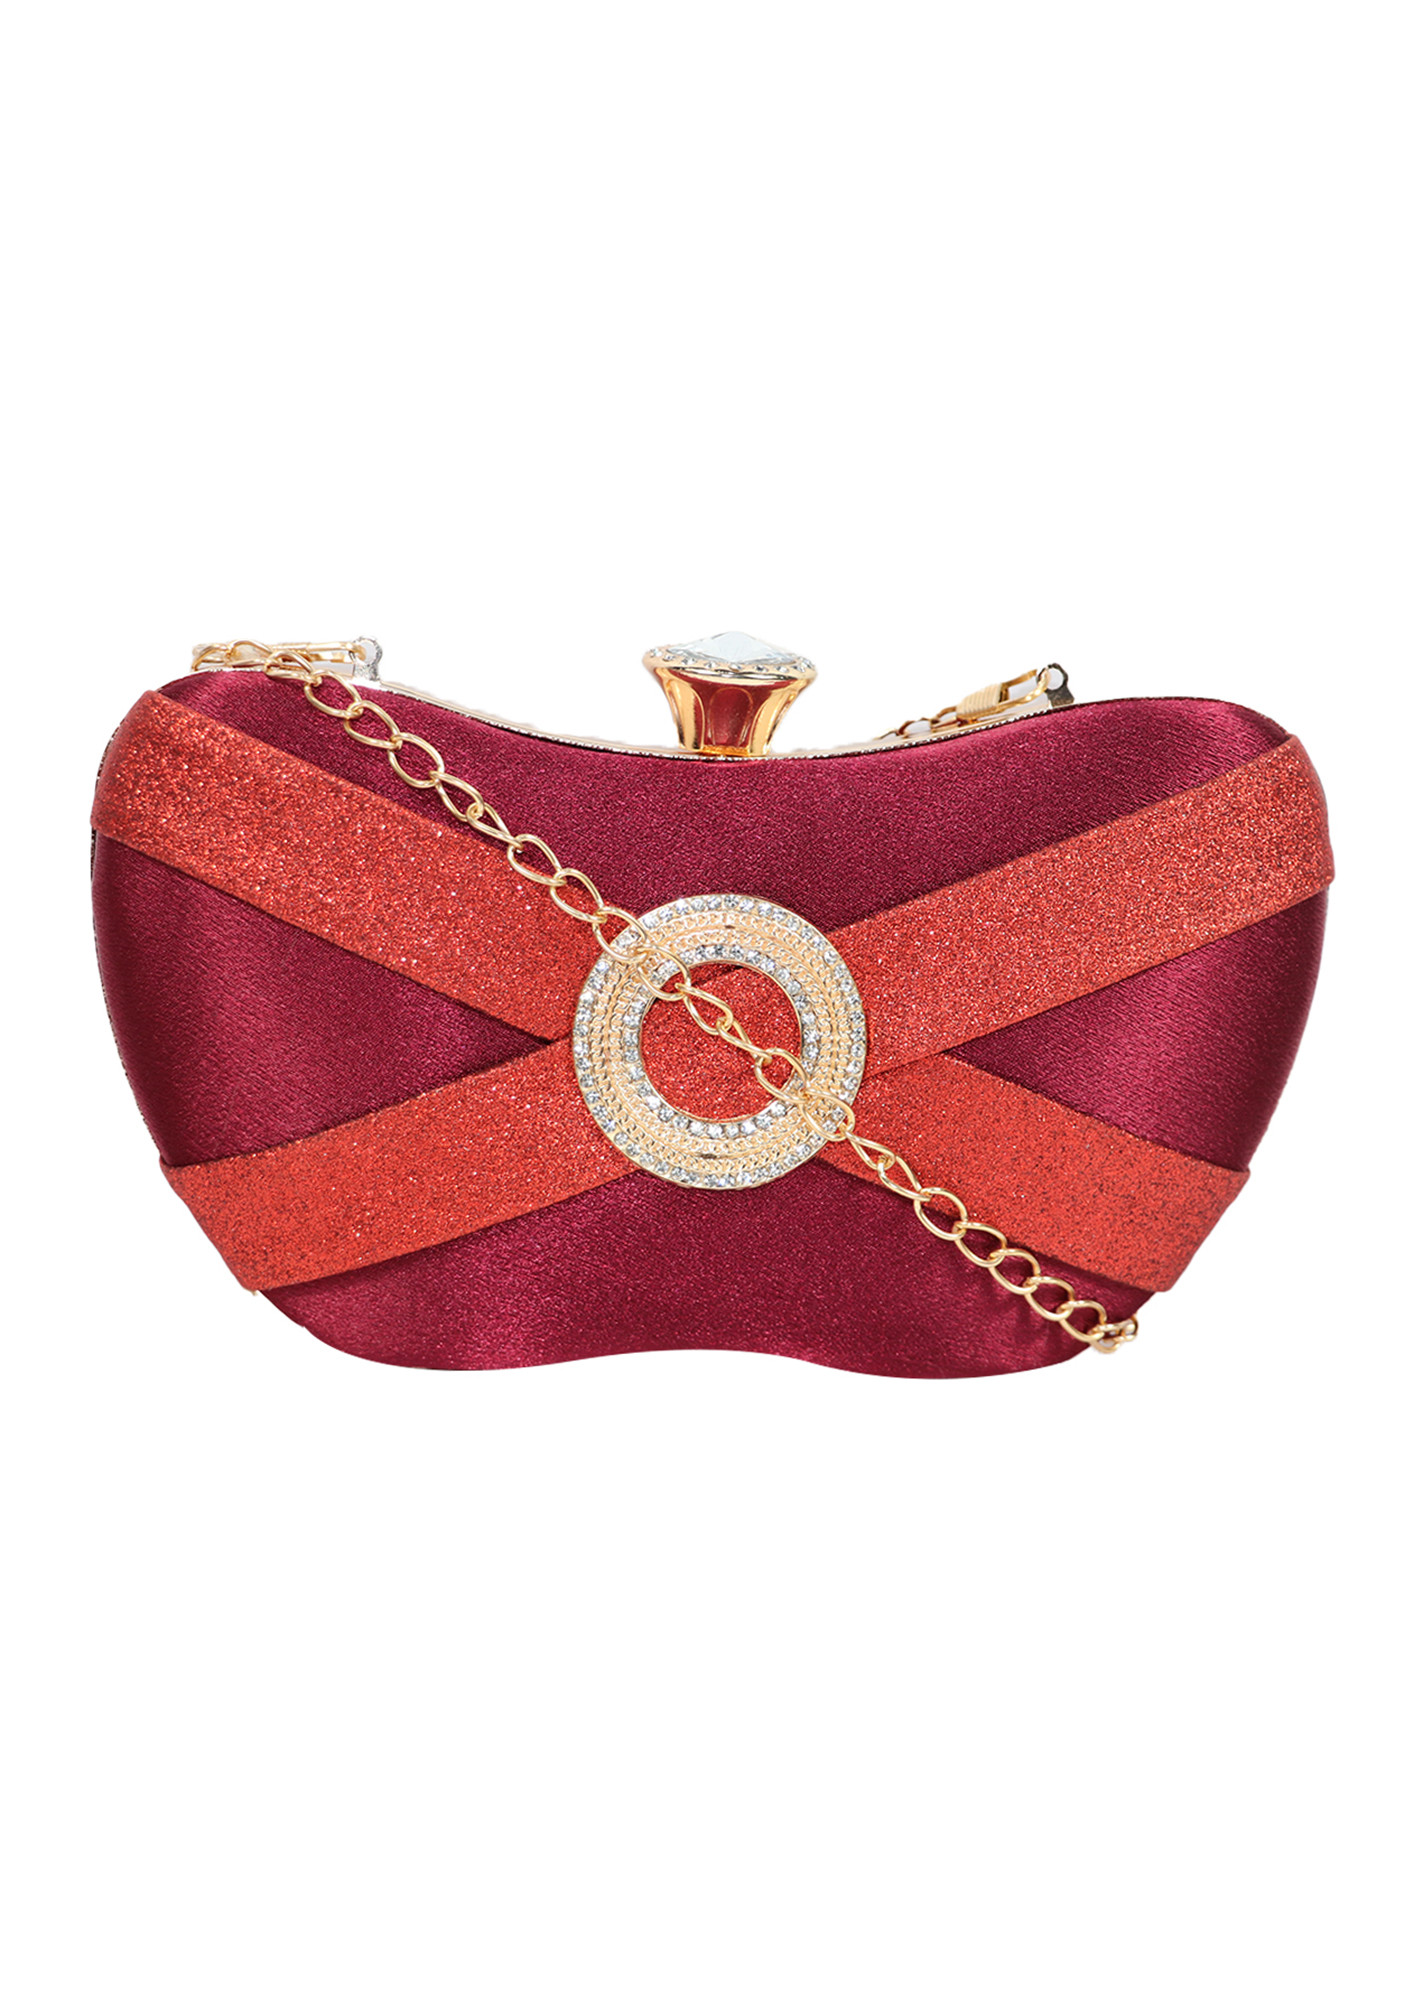 Classy Party Girl'S Red Clutch